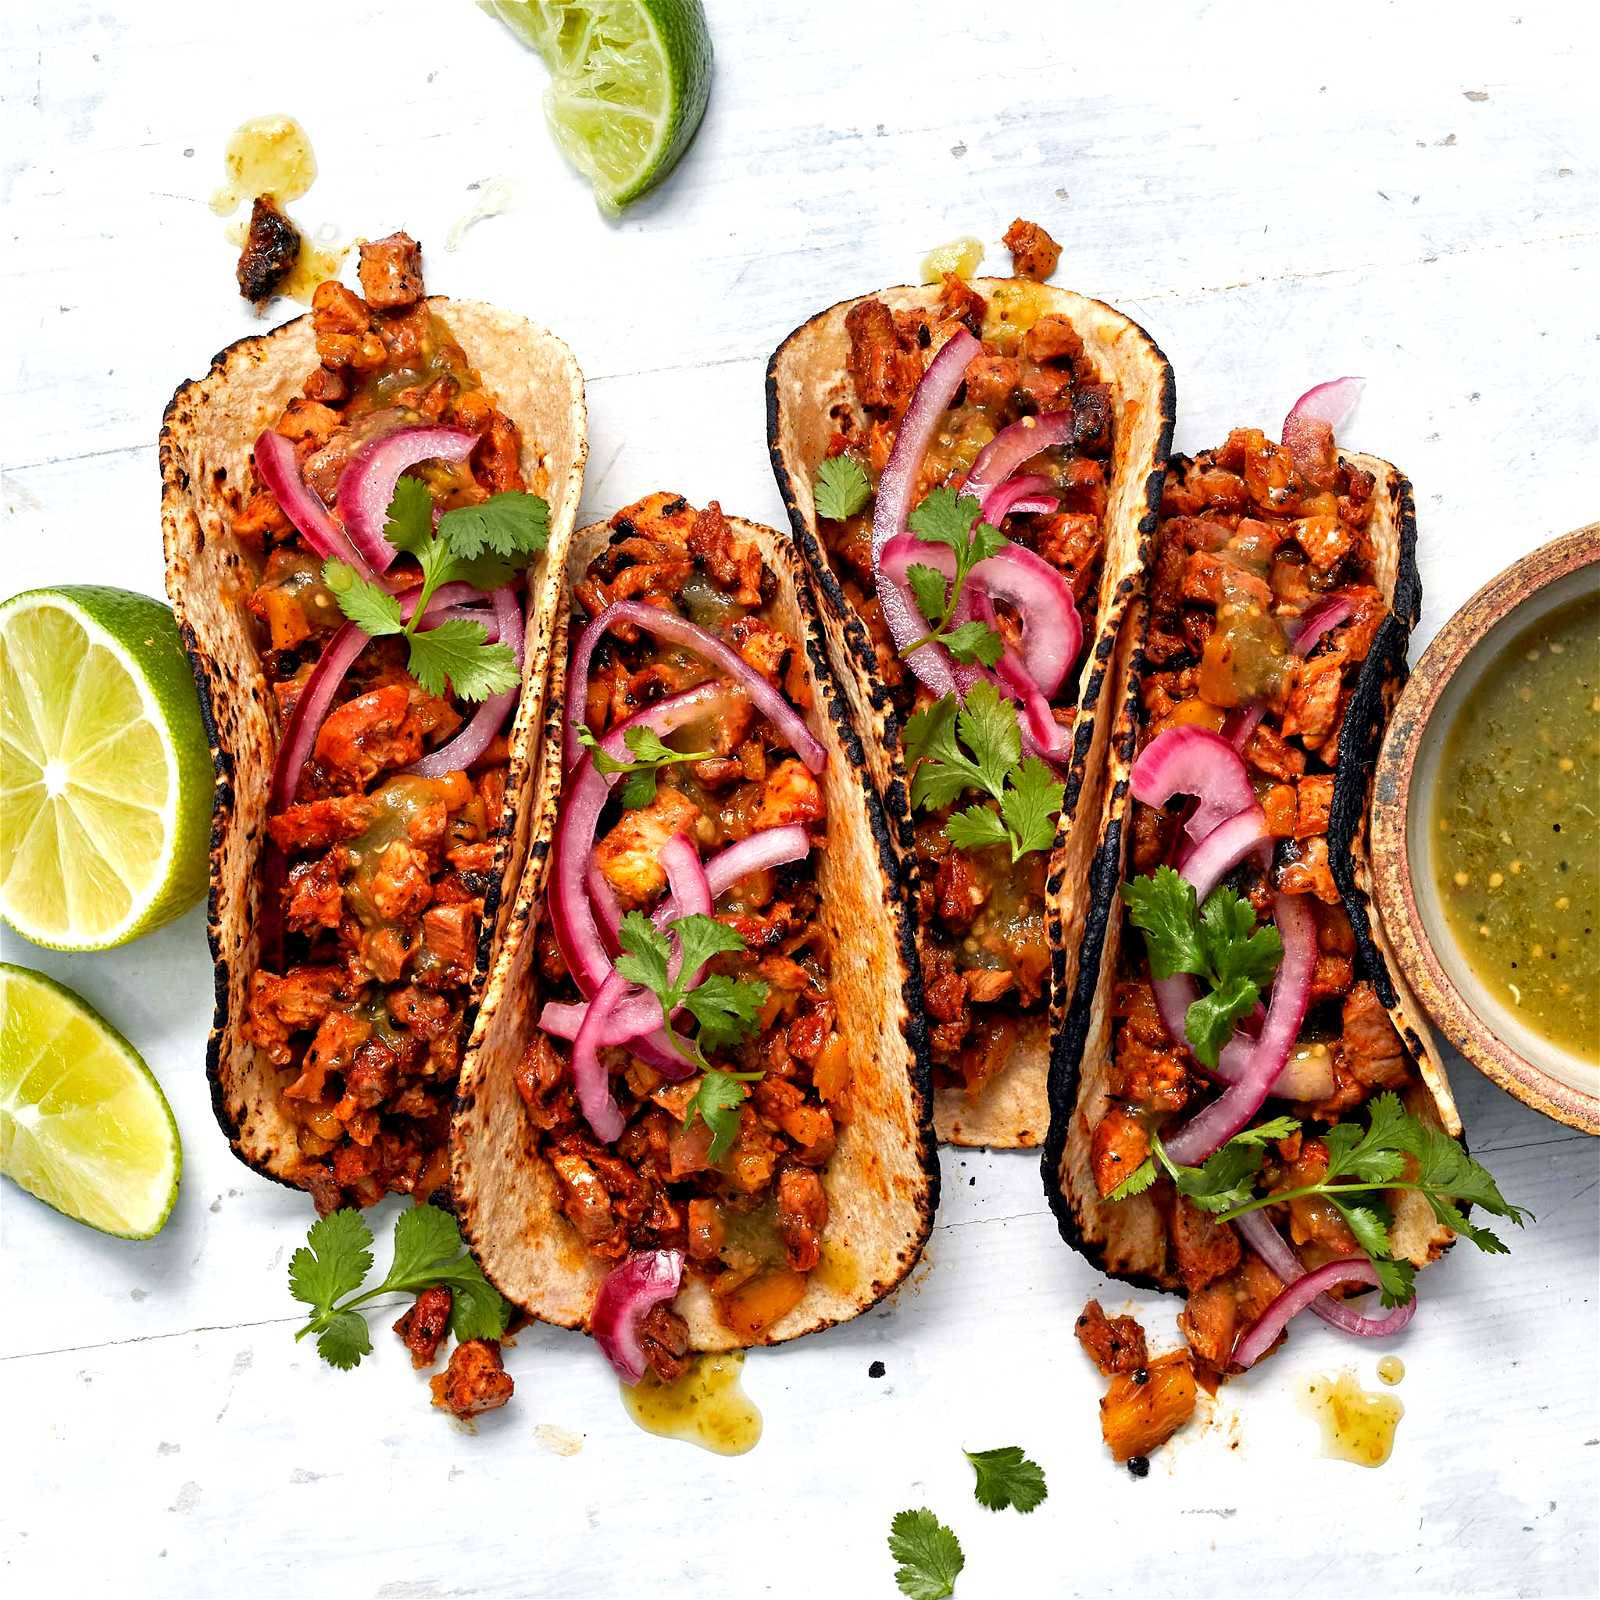 Feast Your Eyes on Mouthwatering Tacos Al Pastor Wallpaper